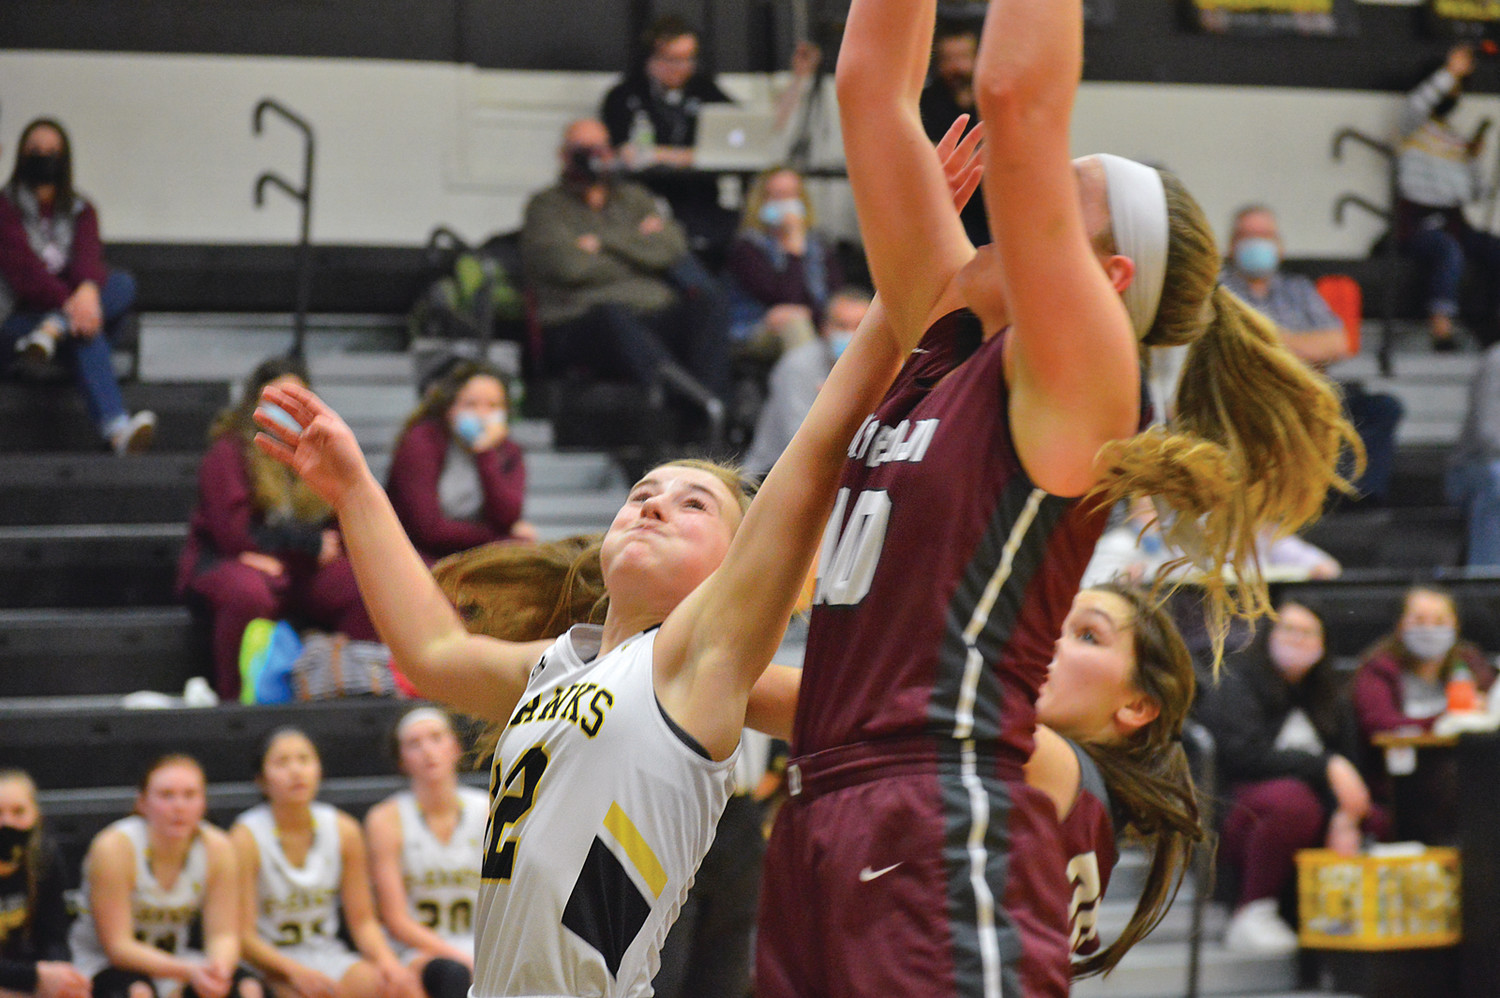 EMMA AUTEN jumps for the rebound against Okoboji Thursday night at Emmetsburg High School. The Lady E-Hawks would start strong but come up short to finish 36-45.